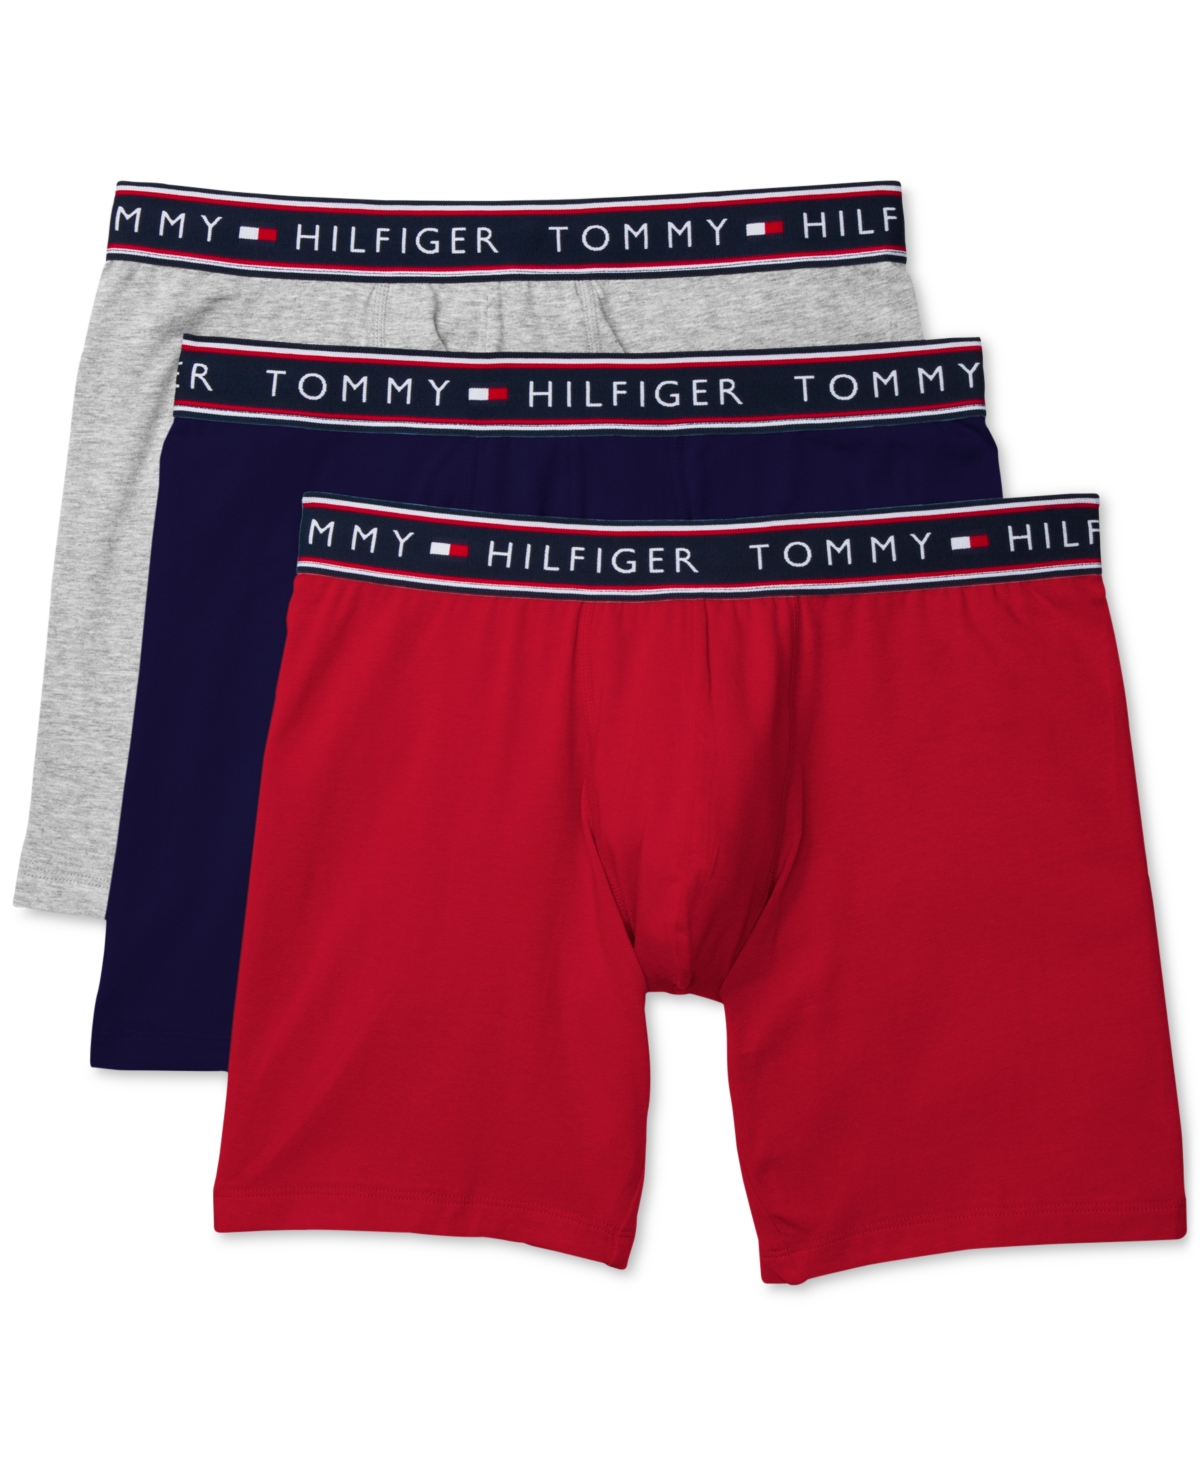 UPC 088541539395 product image for Tommy Hilfiger Men's Cotton Stretch Boxer Brief, 3 Pack | upcitemdb.com